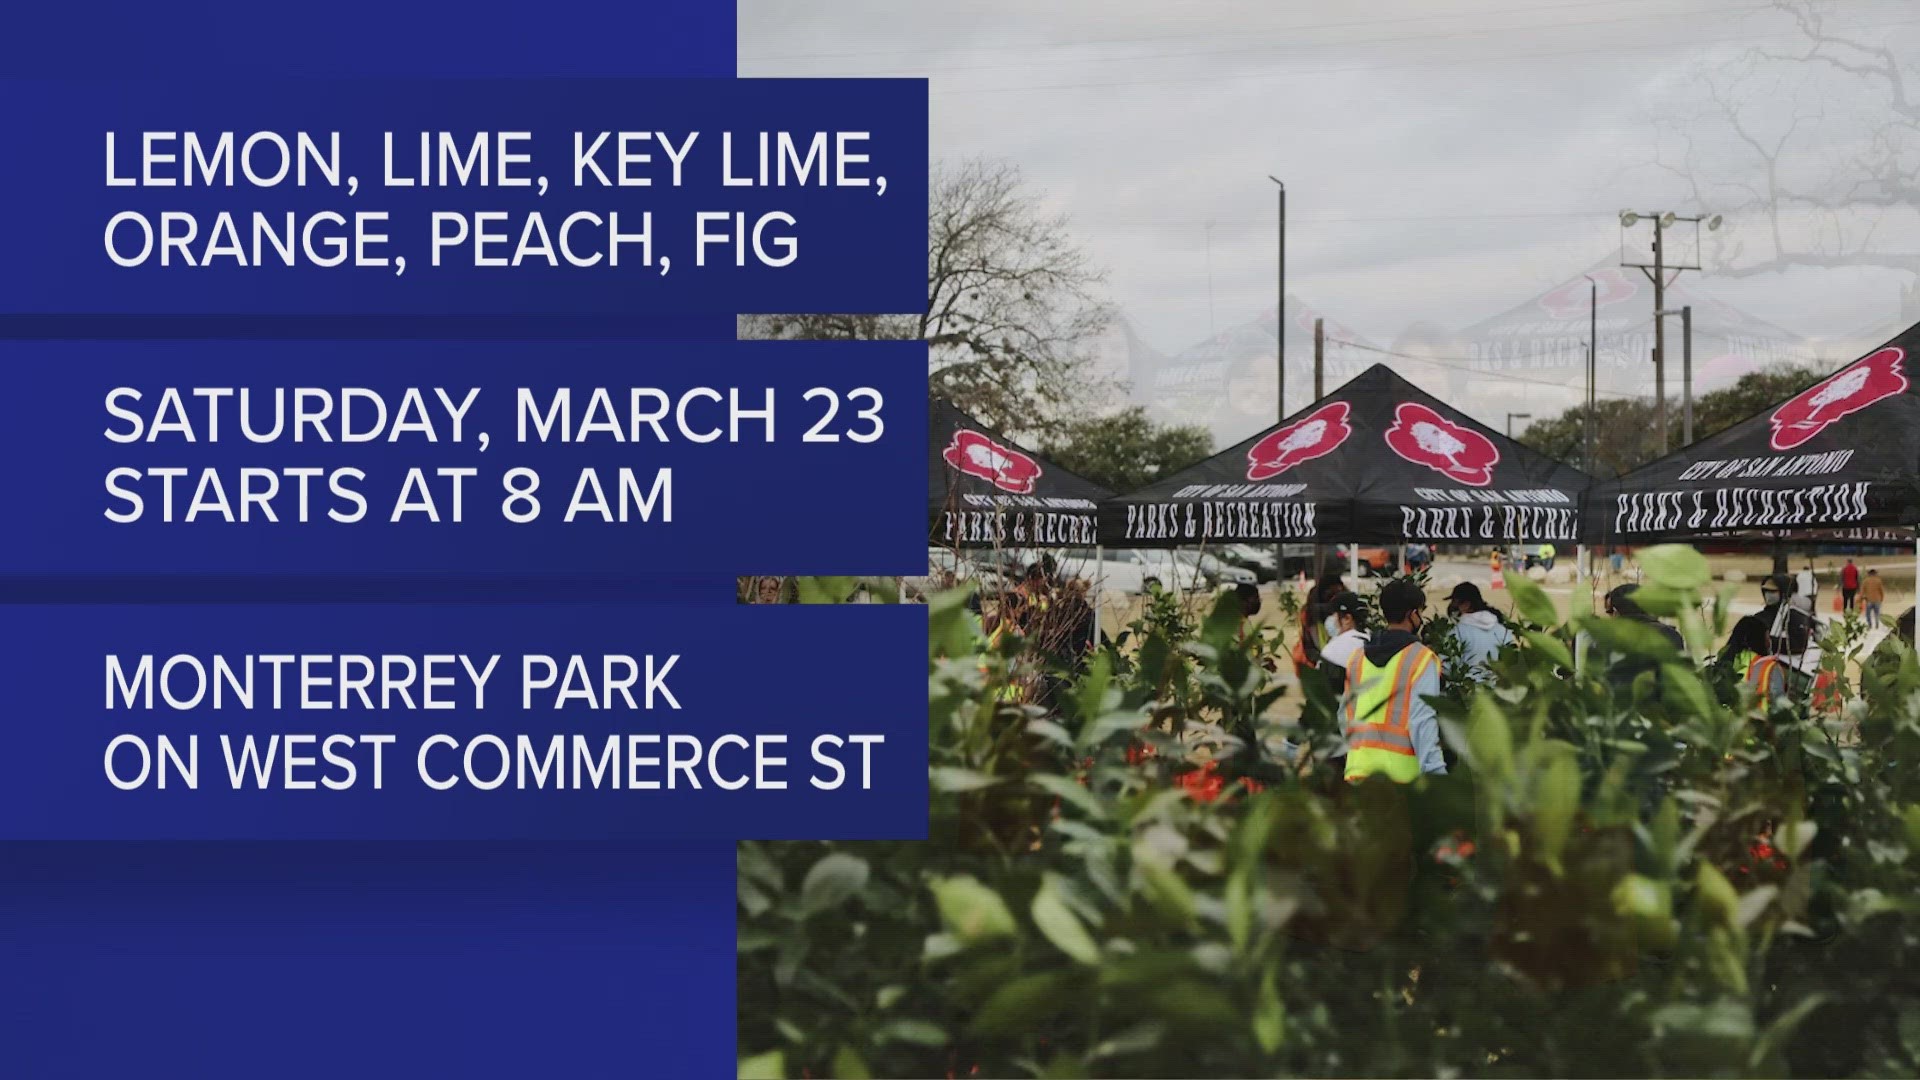 San Antonio Parks and Recreation will hand out 1,000 fruit trees at next saturday's event. The walk-up event starts at 8 a.m.